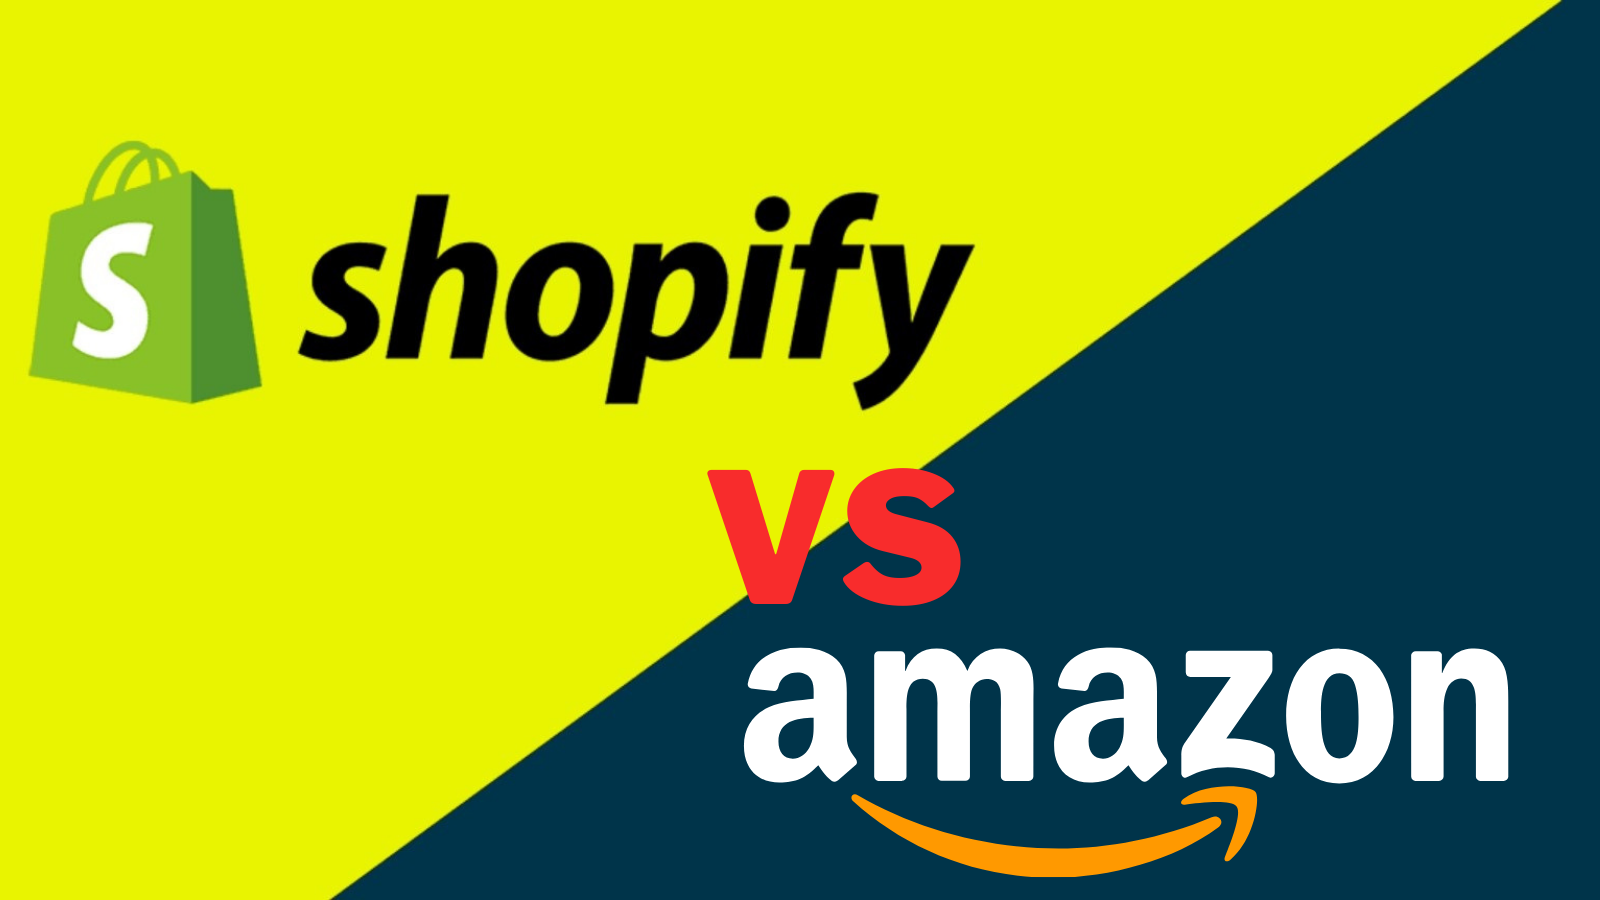 Shopify VS. Amazon: Which is better for e-Commerce in 2022?